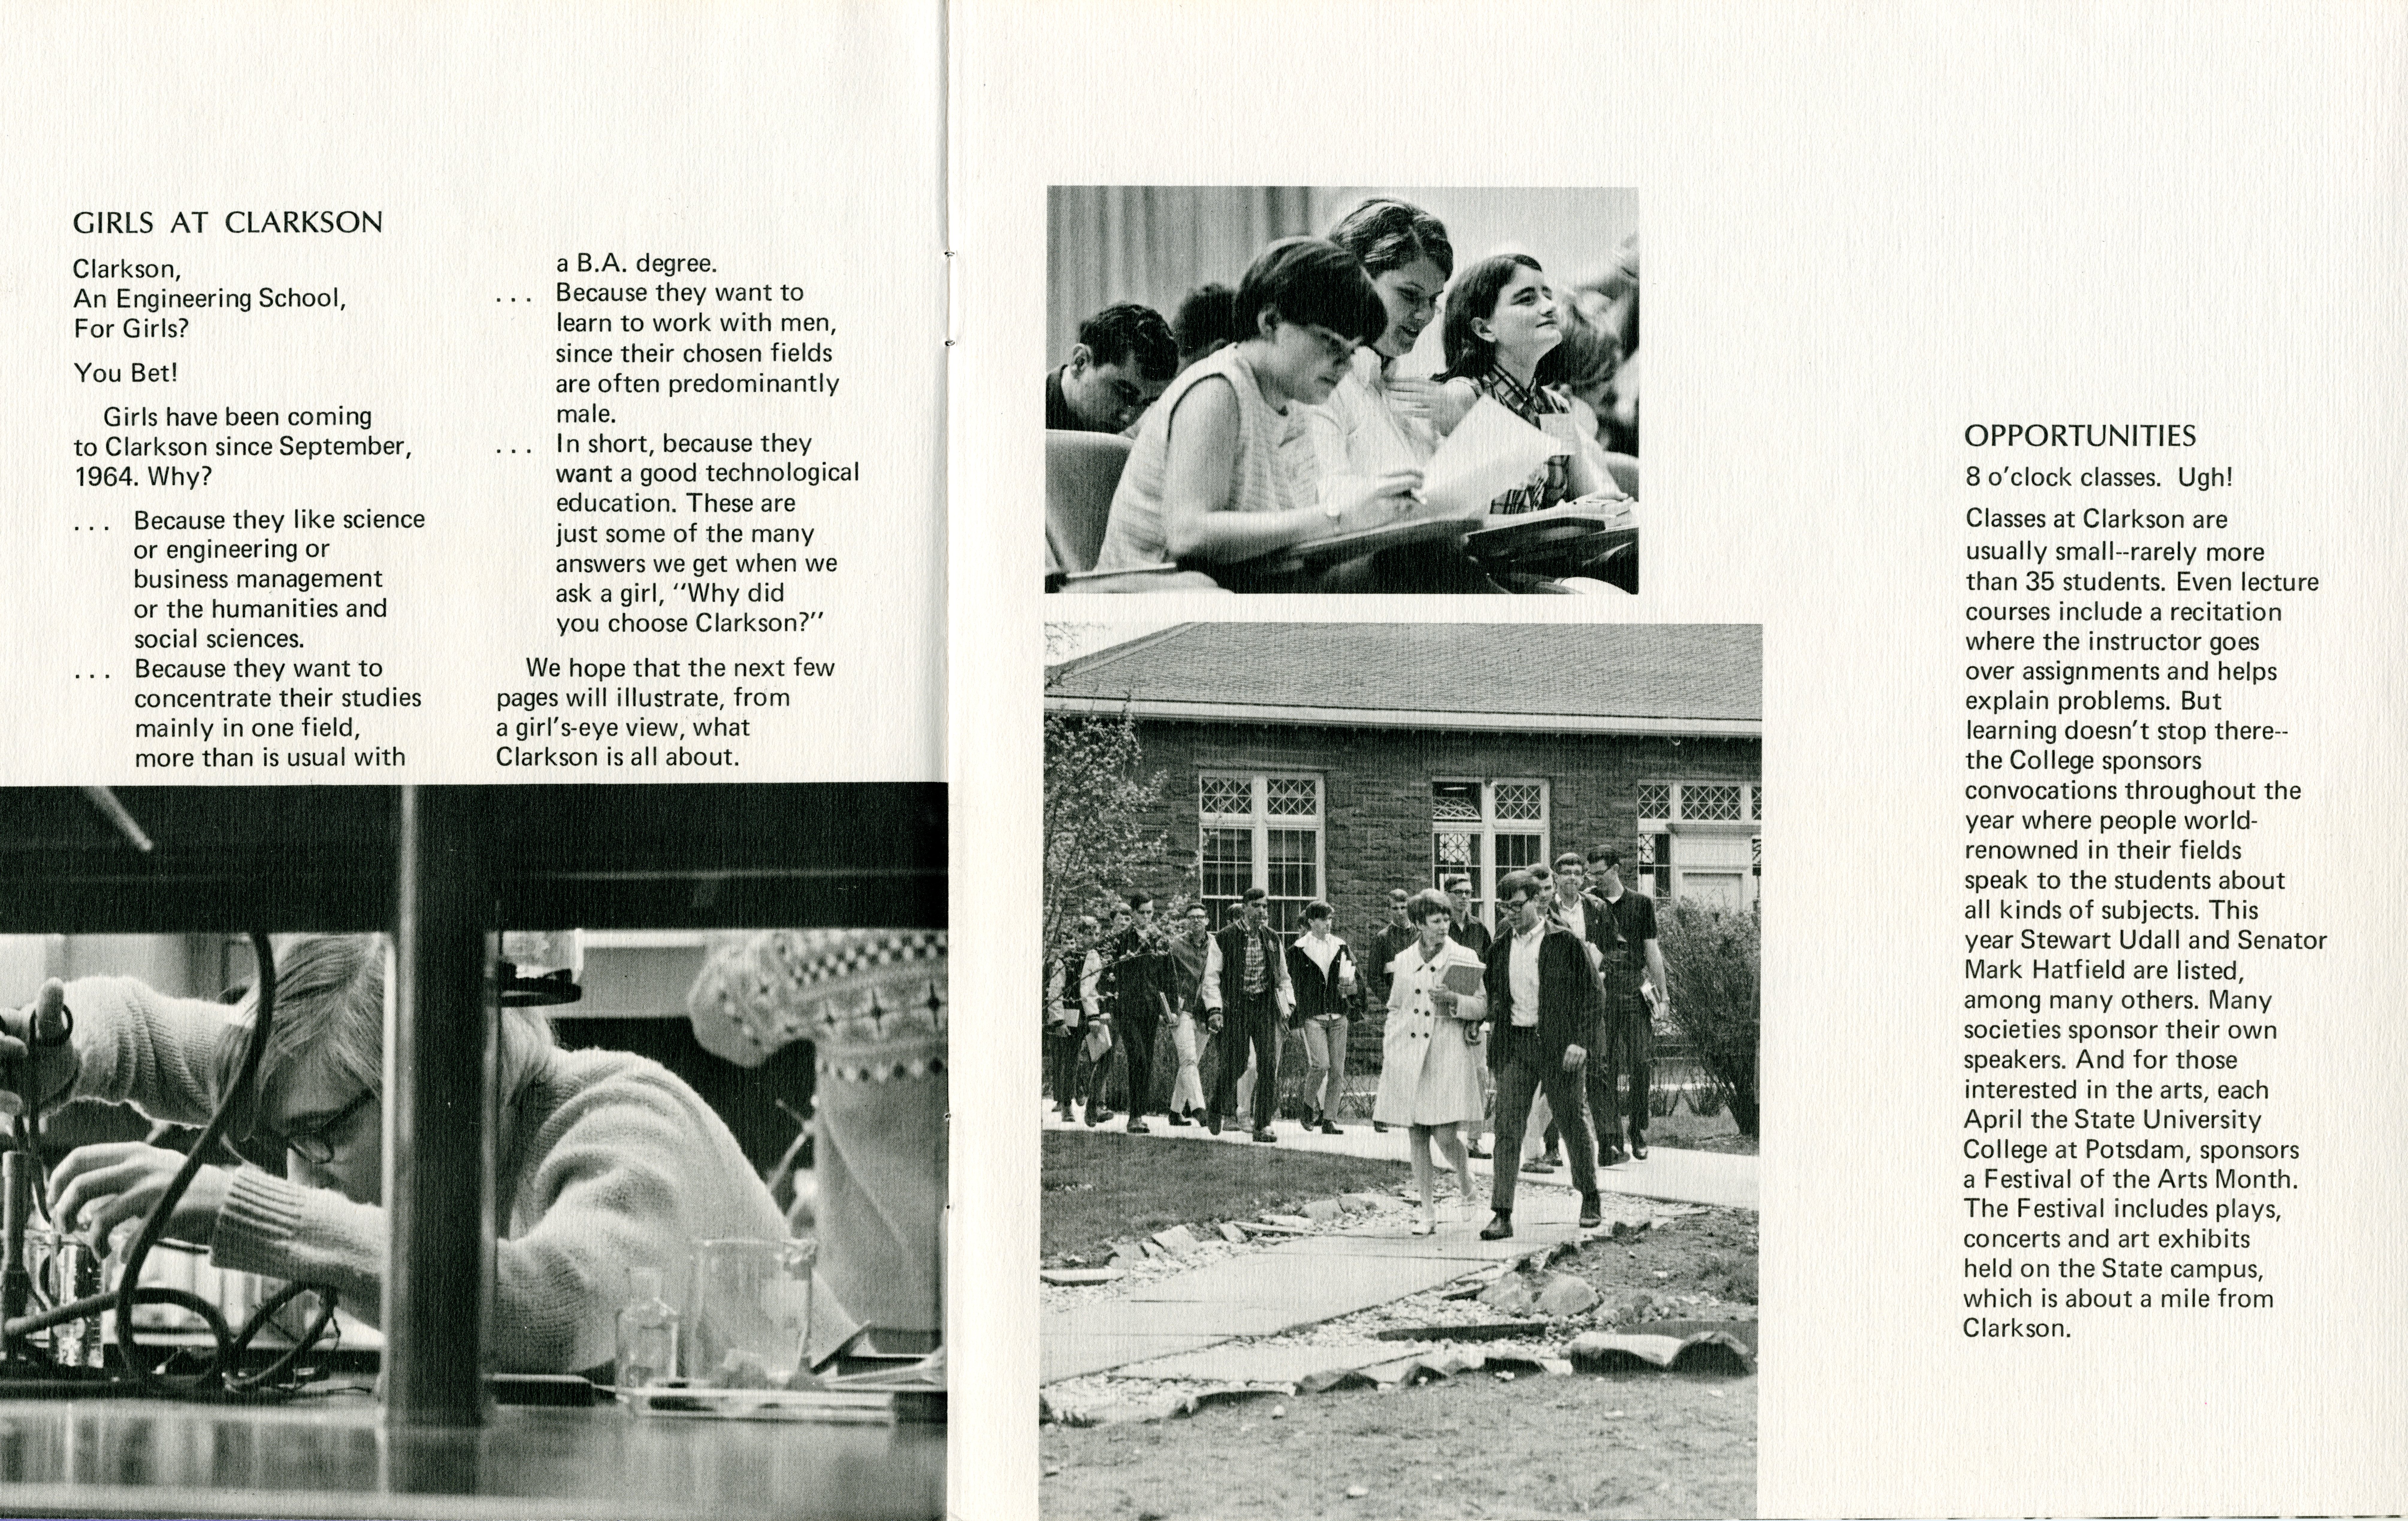 From <i>The Girls at Clarkson</i>, a 1971 promotional pamphlet